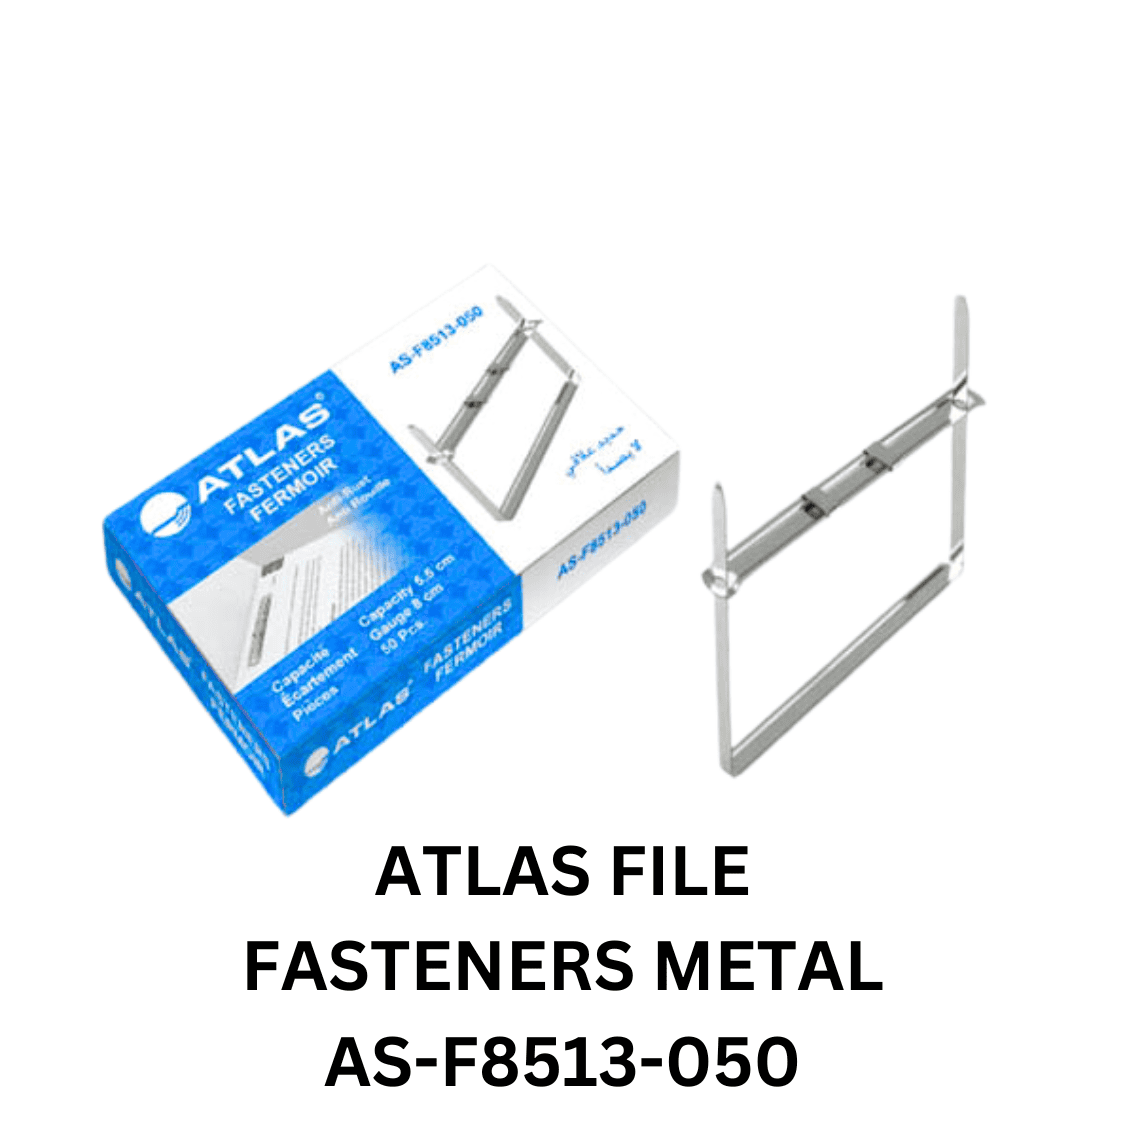 ATLAS FILE FASTENERS METAL AS-F8513-050 - Pack of 50 metal file fasteners for secure document binding. Ideal for office, school, and home use.